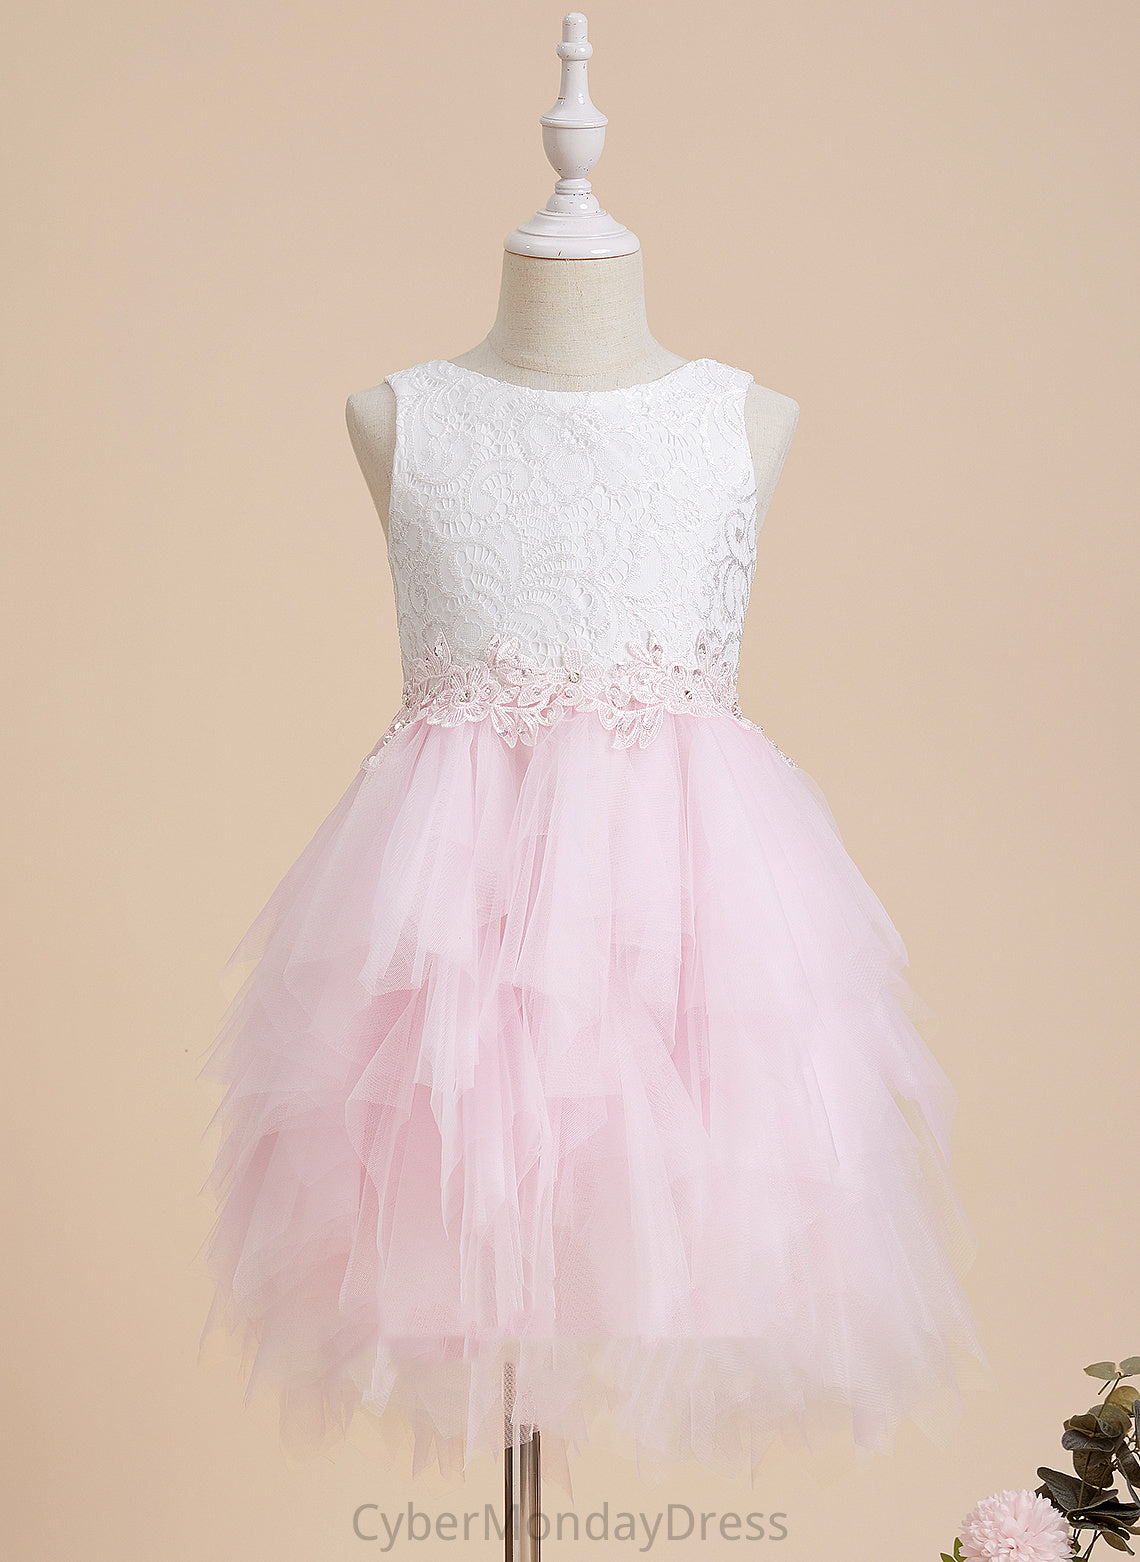 Ball-Gown/Princess Pam Back Lace/Beading/Sequins/V Neck Knee-length Sleeveless Scoop Dress Girl With Flower Flower Girl Dresses - Tulle/Lace